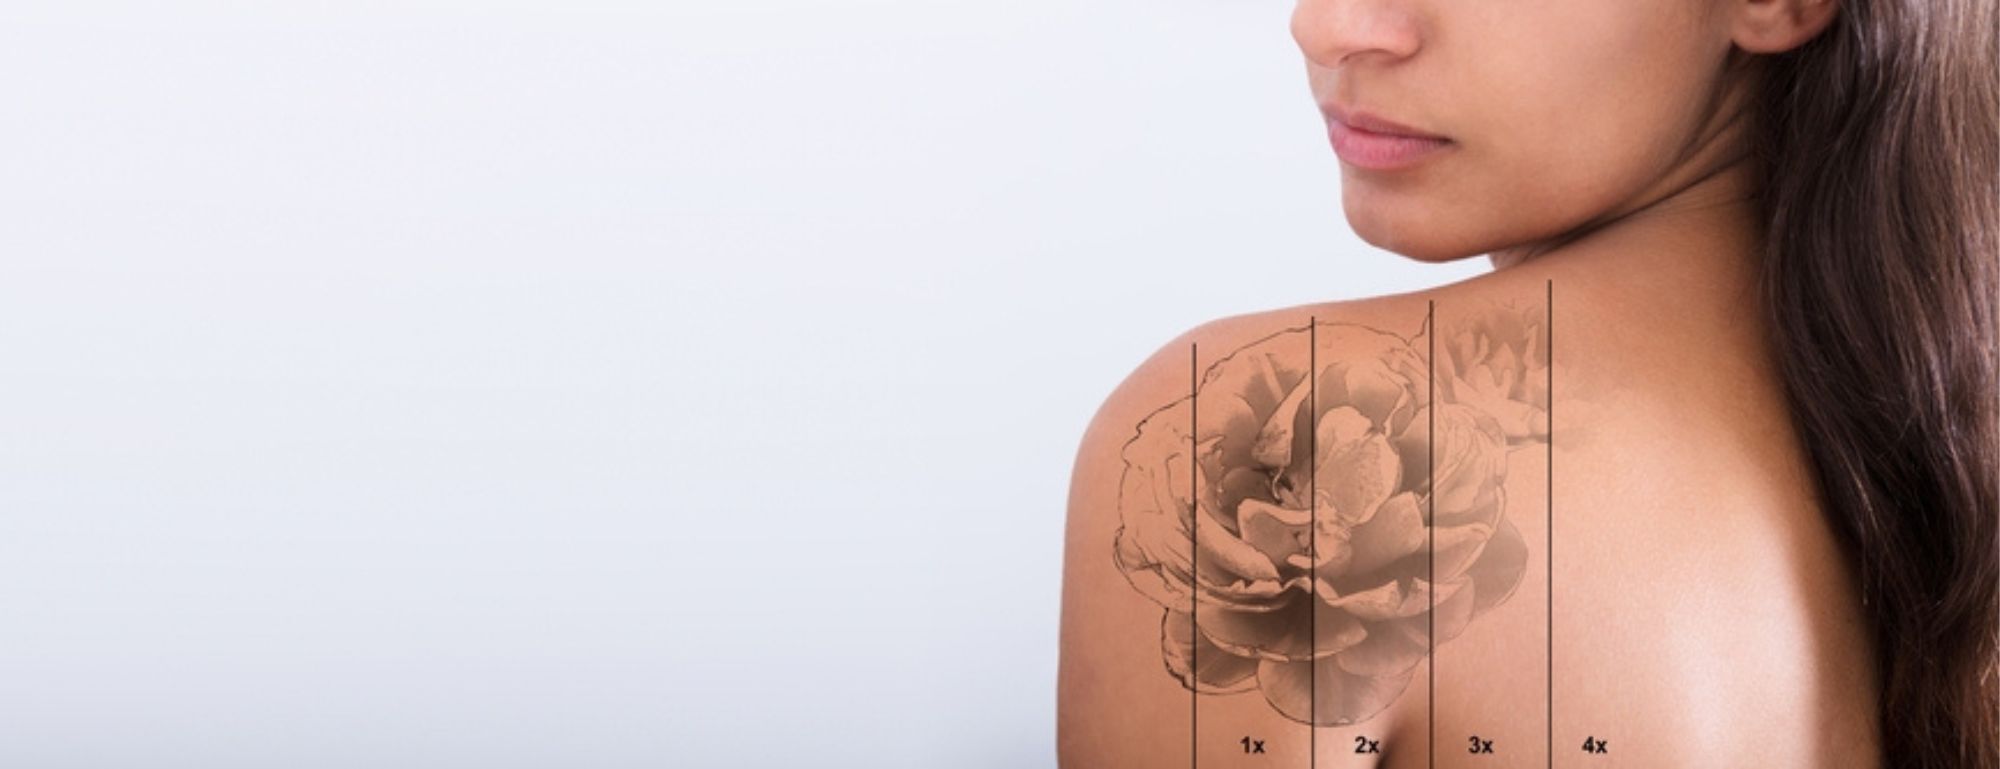 Lasers For Tattoos And Acne Scars | Fairview Laser Clinic Inc.